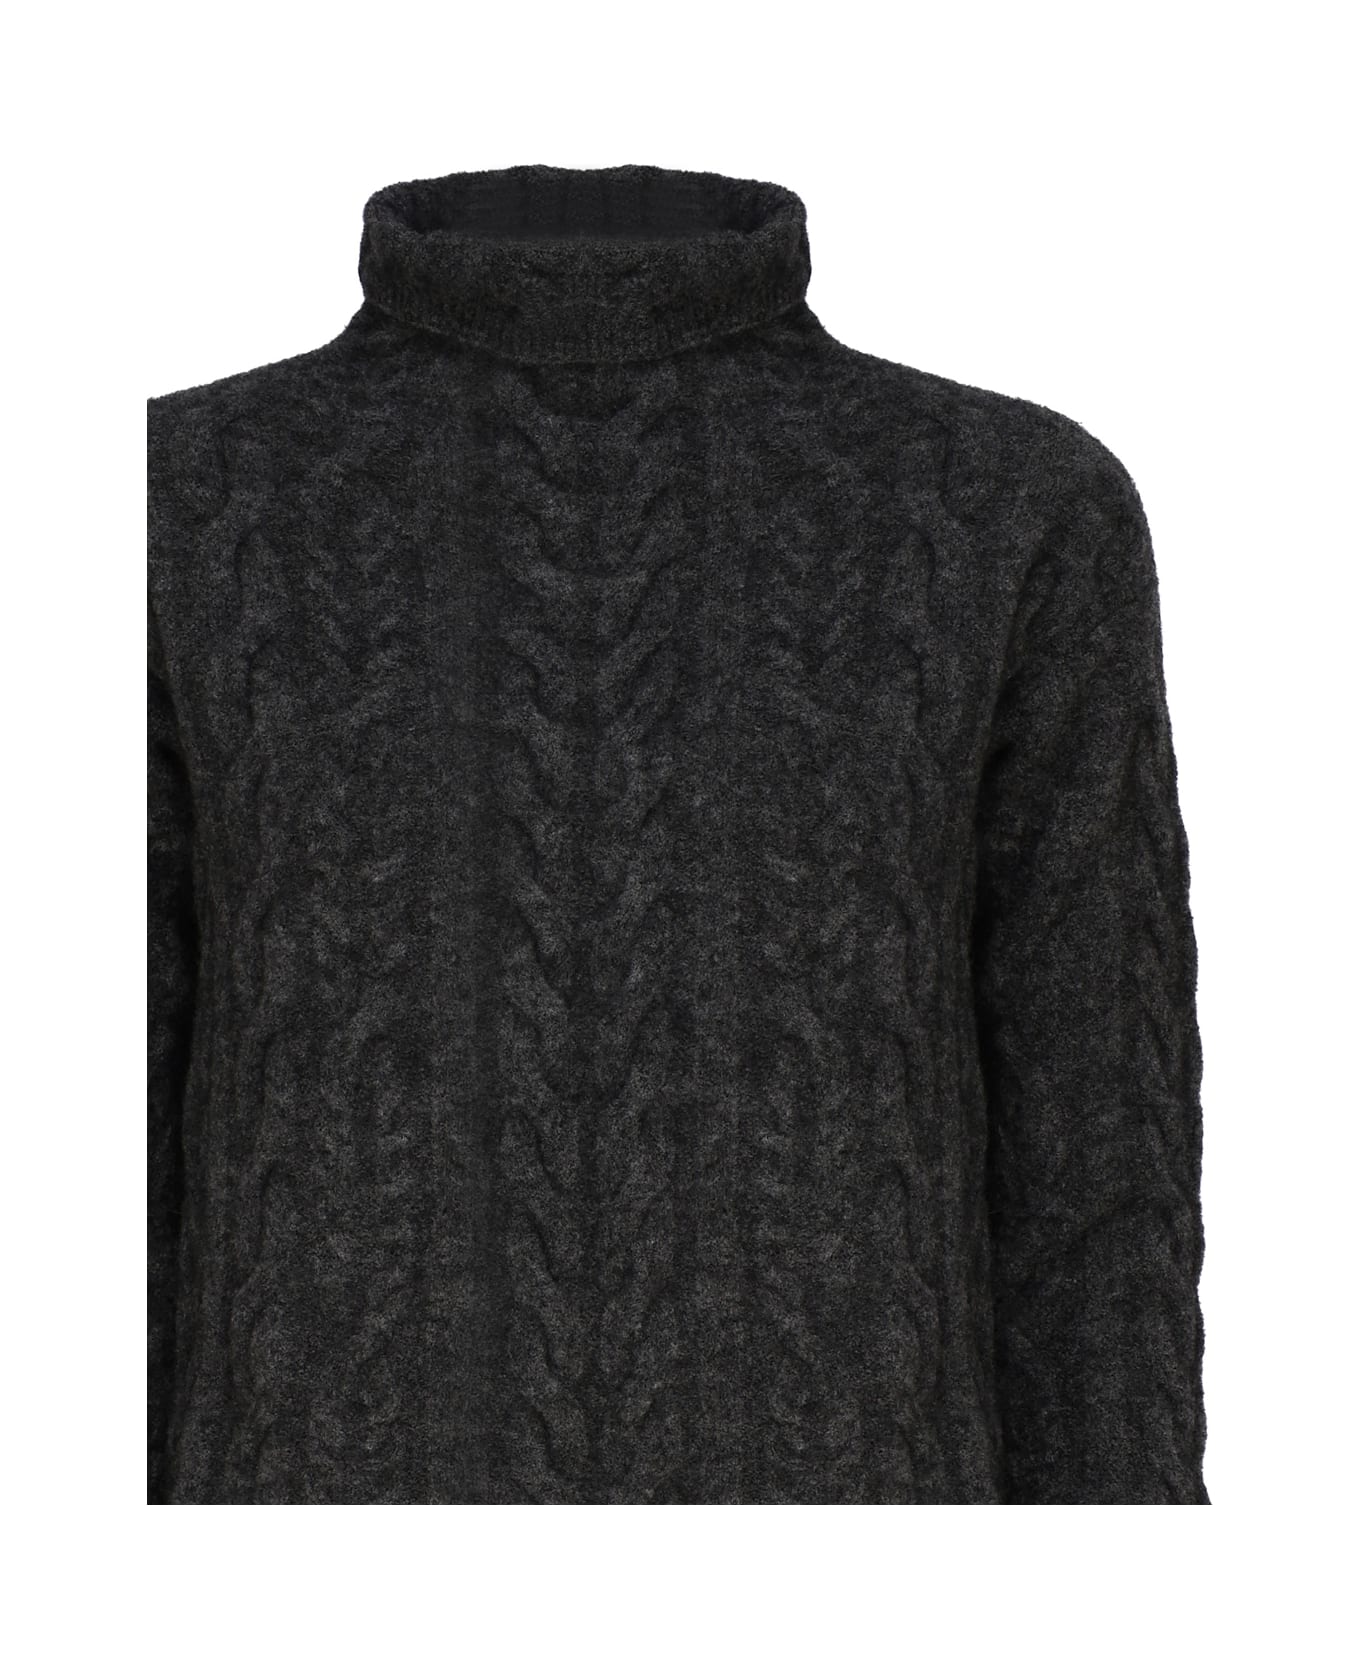 'S Max Mara Turtleneck Sweater In Wool And Mohair - Grey ニットウェア